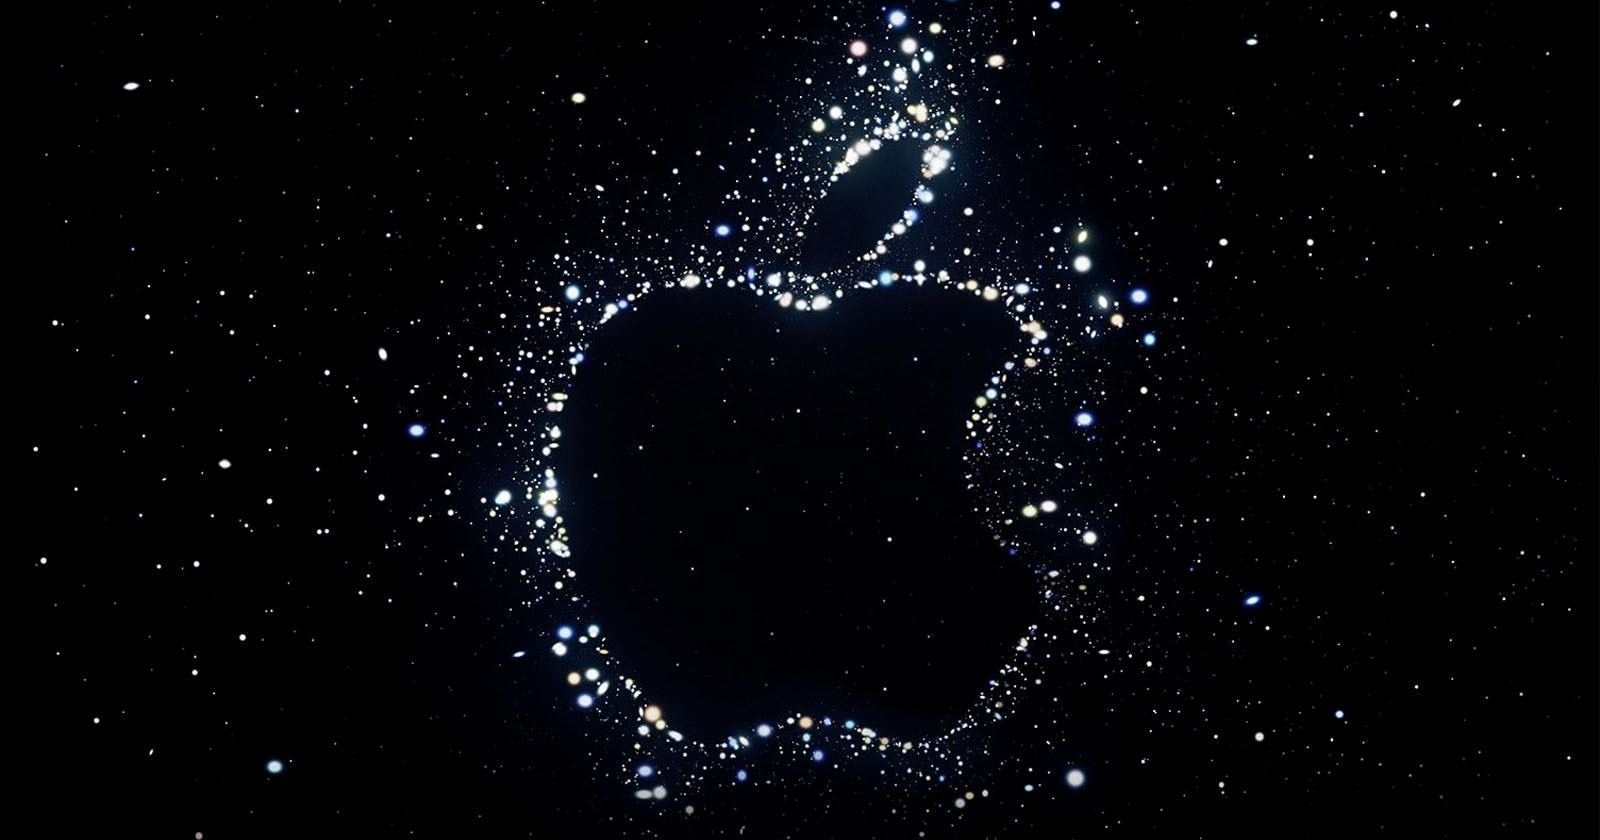 Apple Hints at Astrophotography in September 7 Far Out Event